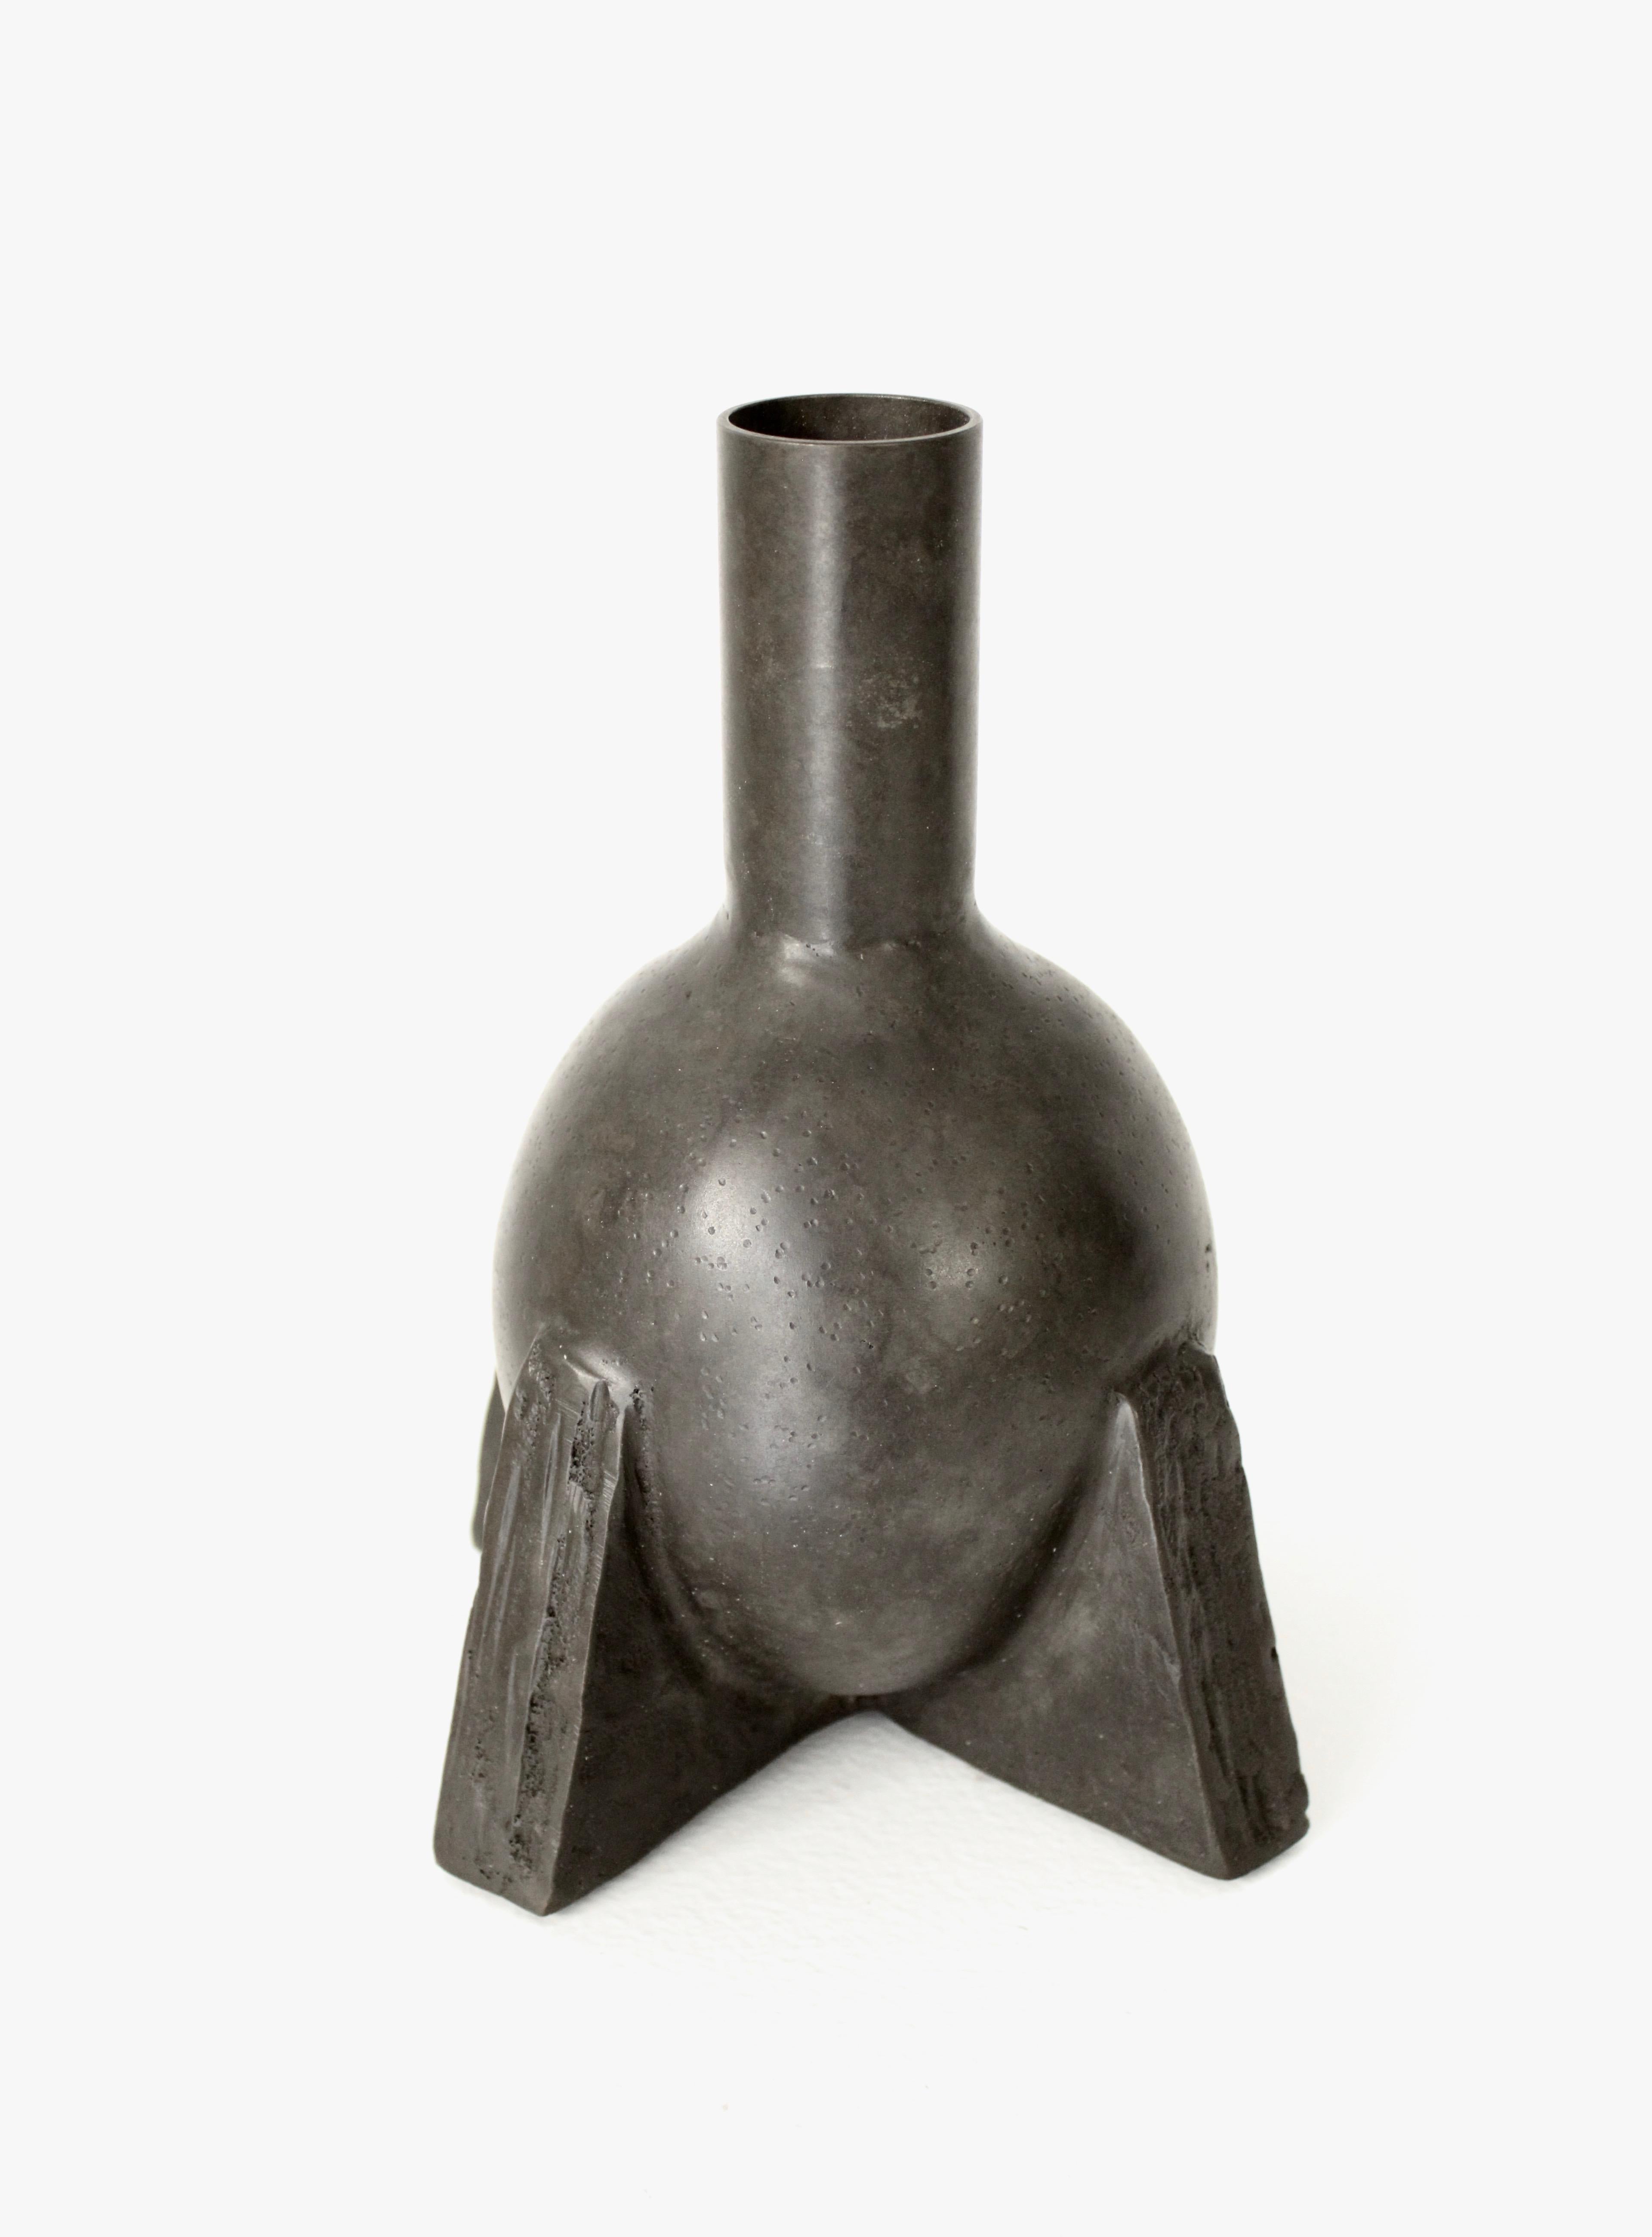 The now iconic bronze duck neck vase from the Rick Owens bronze relic collection.
This is shown in the nitrate patina. 
Each bronze is handcrafted in France and is signed.
Can be used as vase or sculptural object. Will hold water.
The last photo